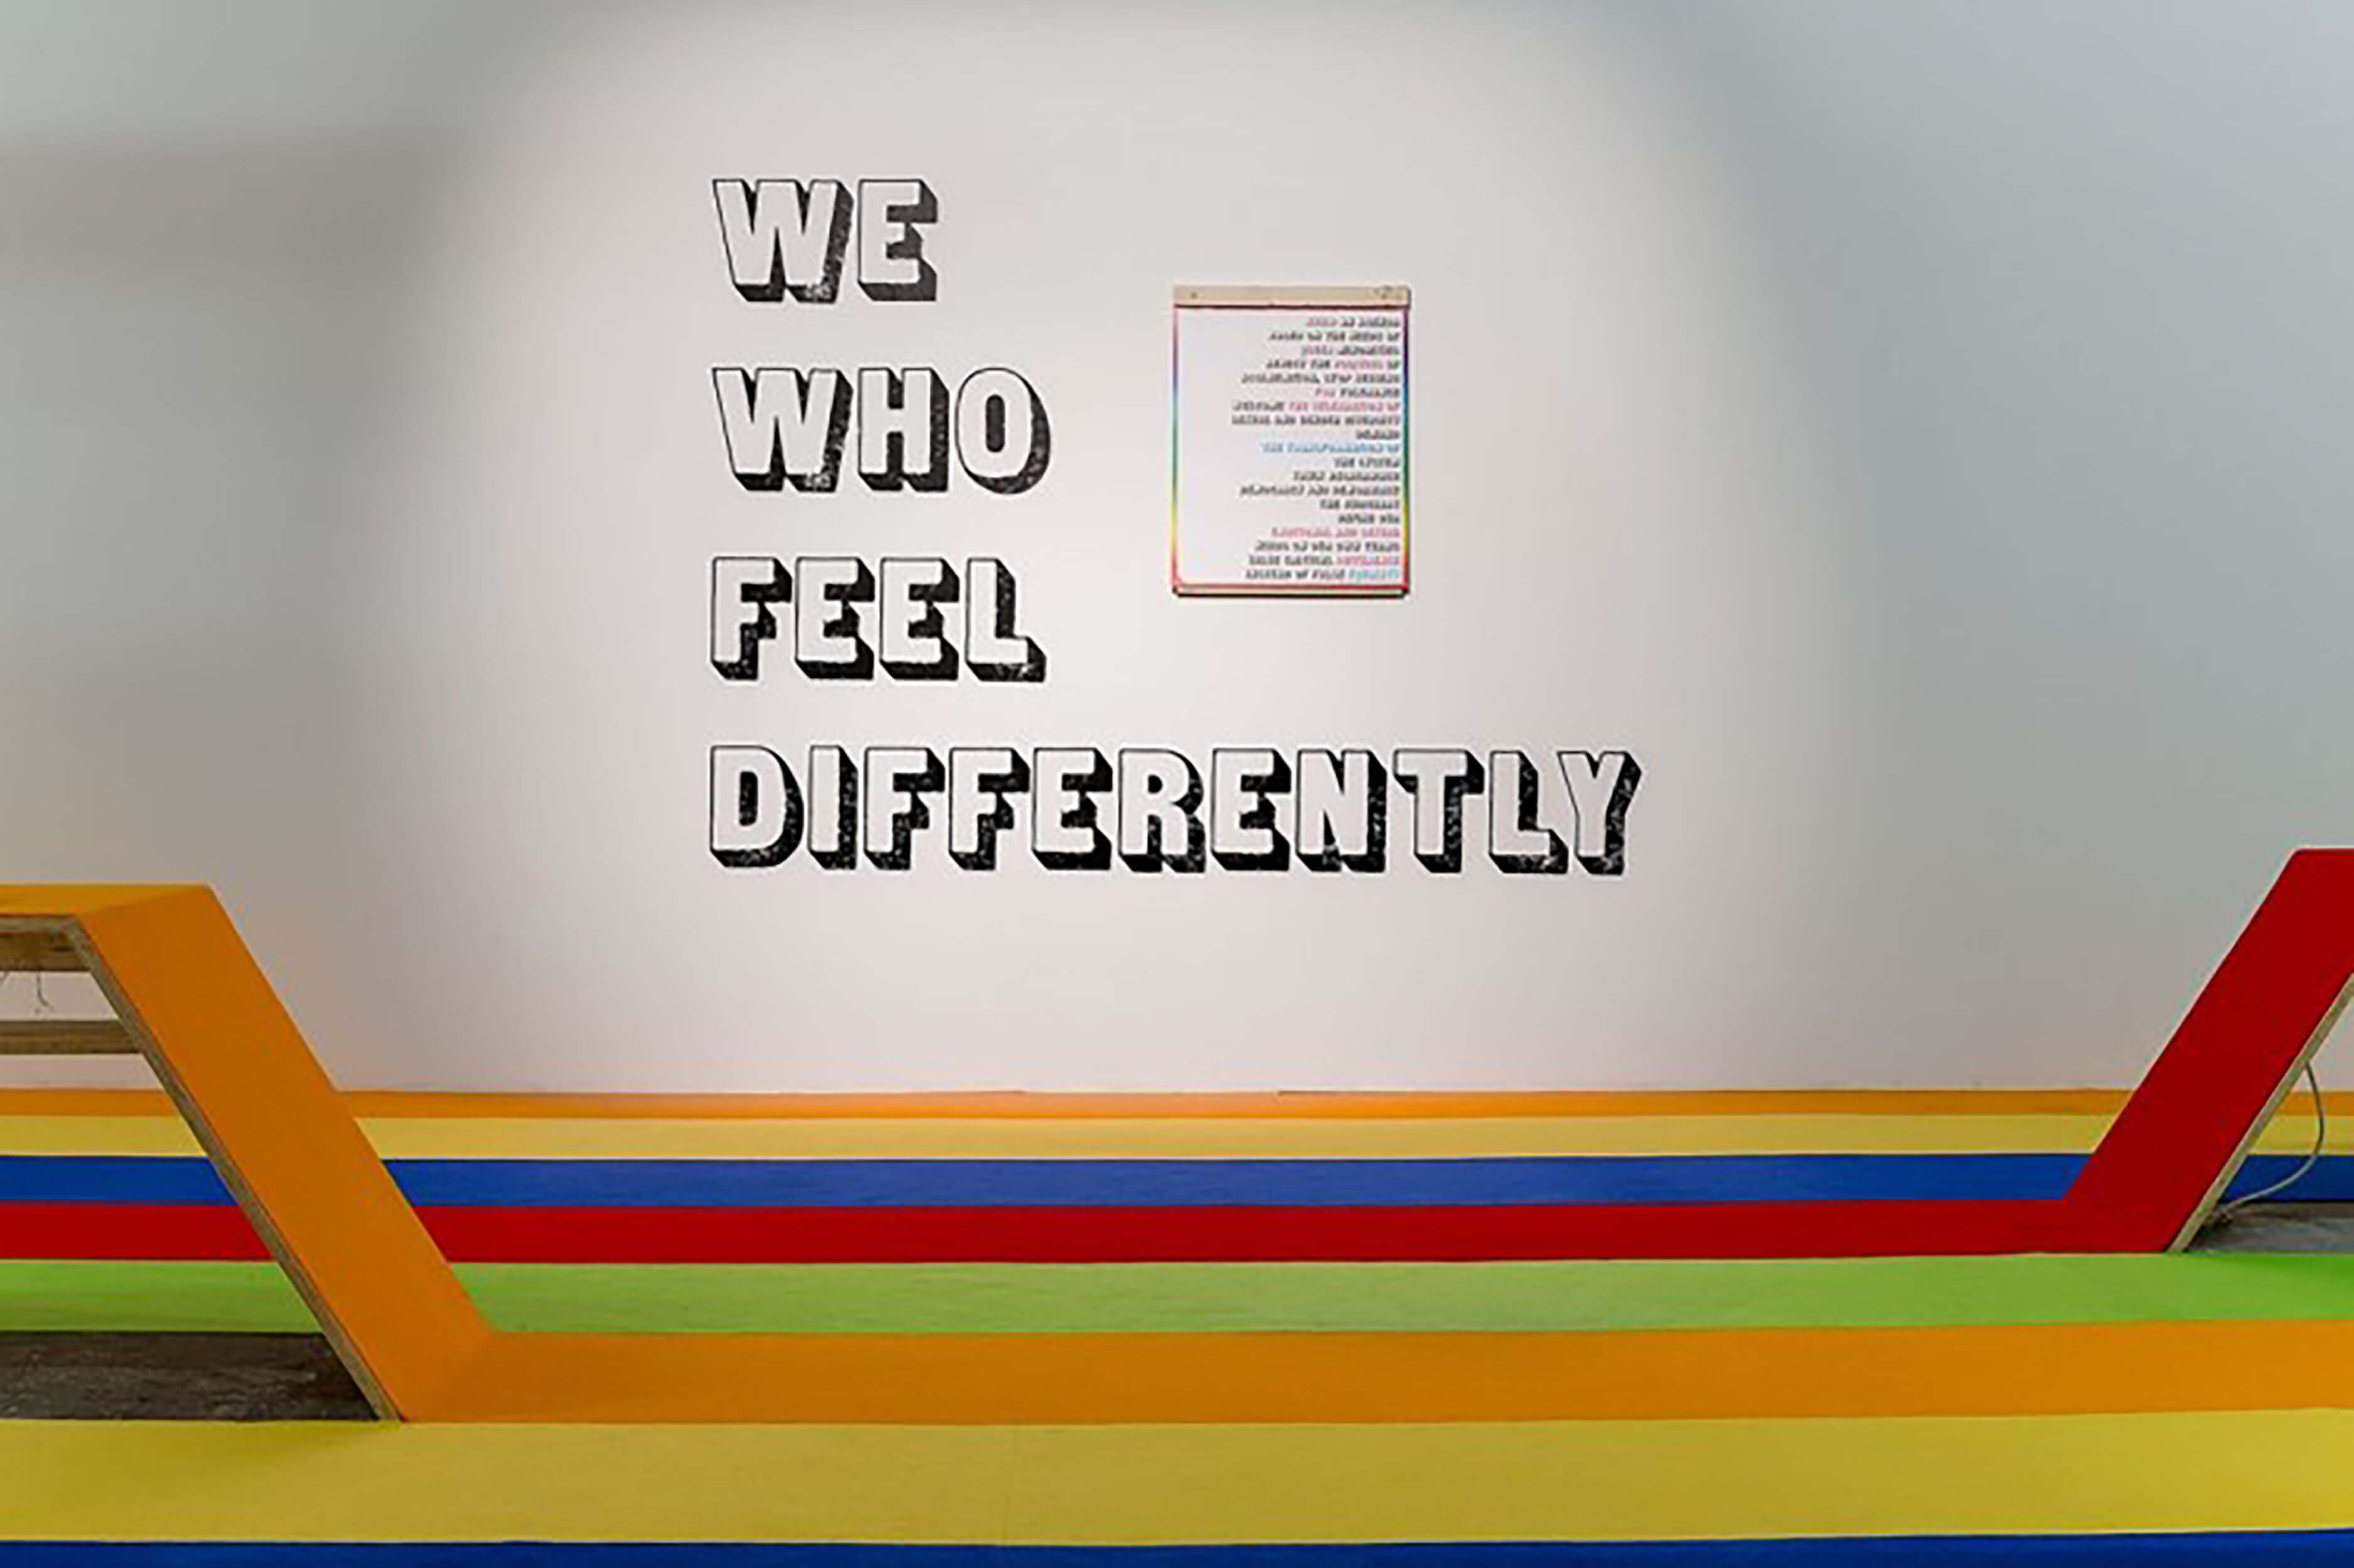 We Who Feel Differently art work fusing poetry by Carlos Motta